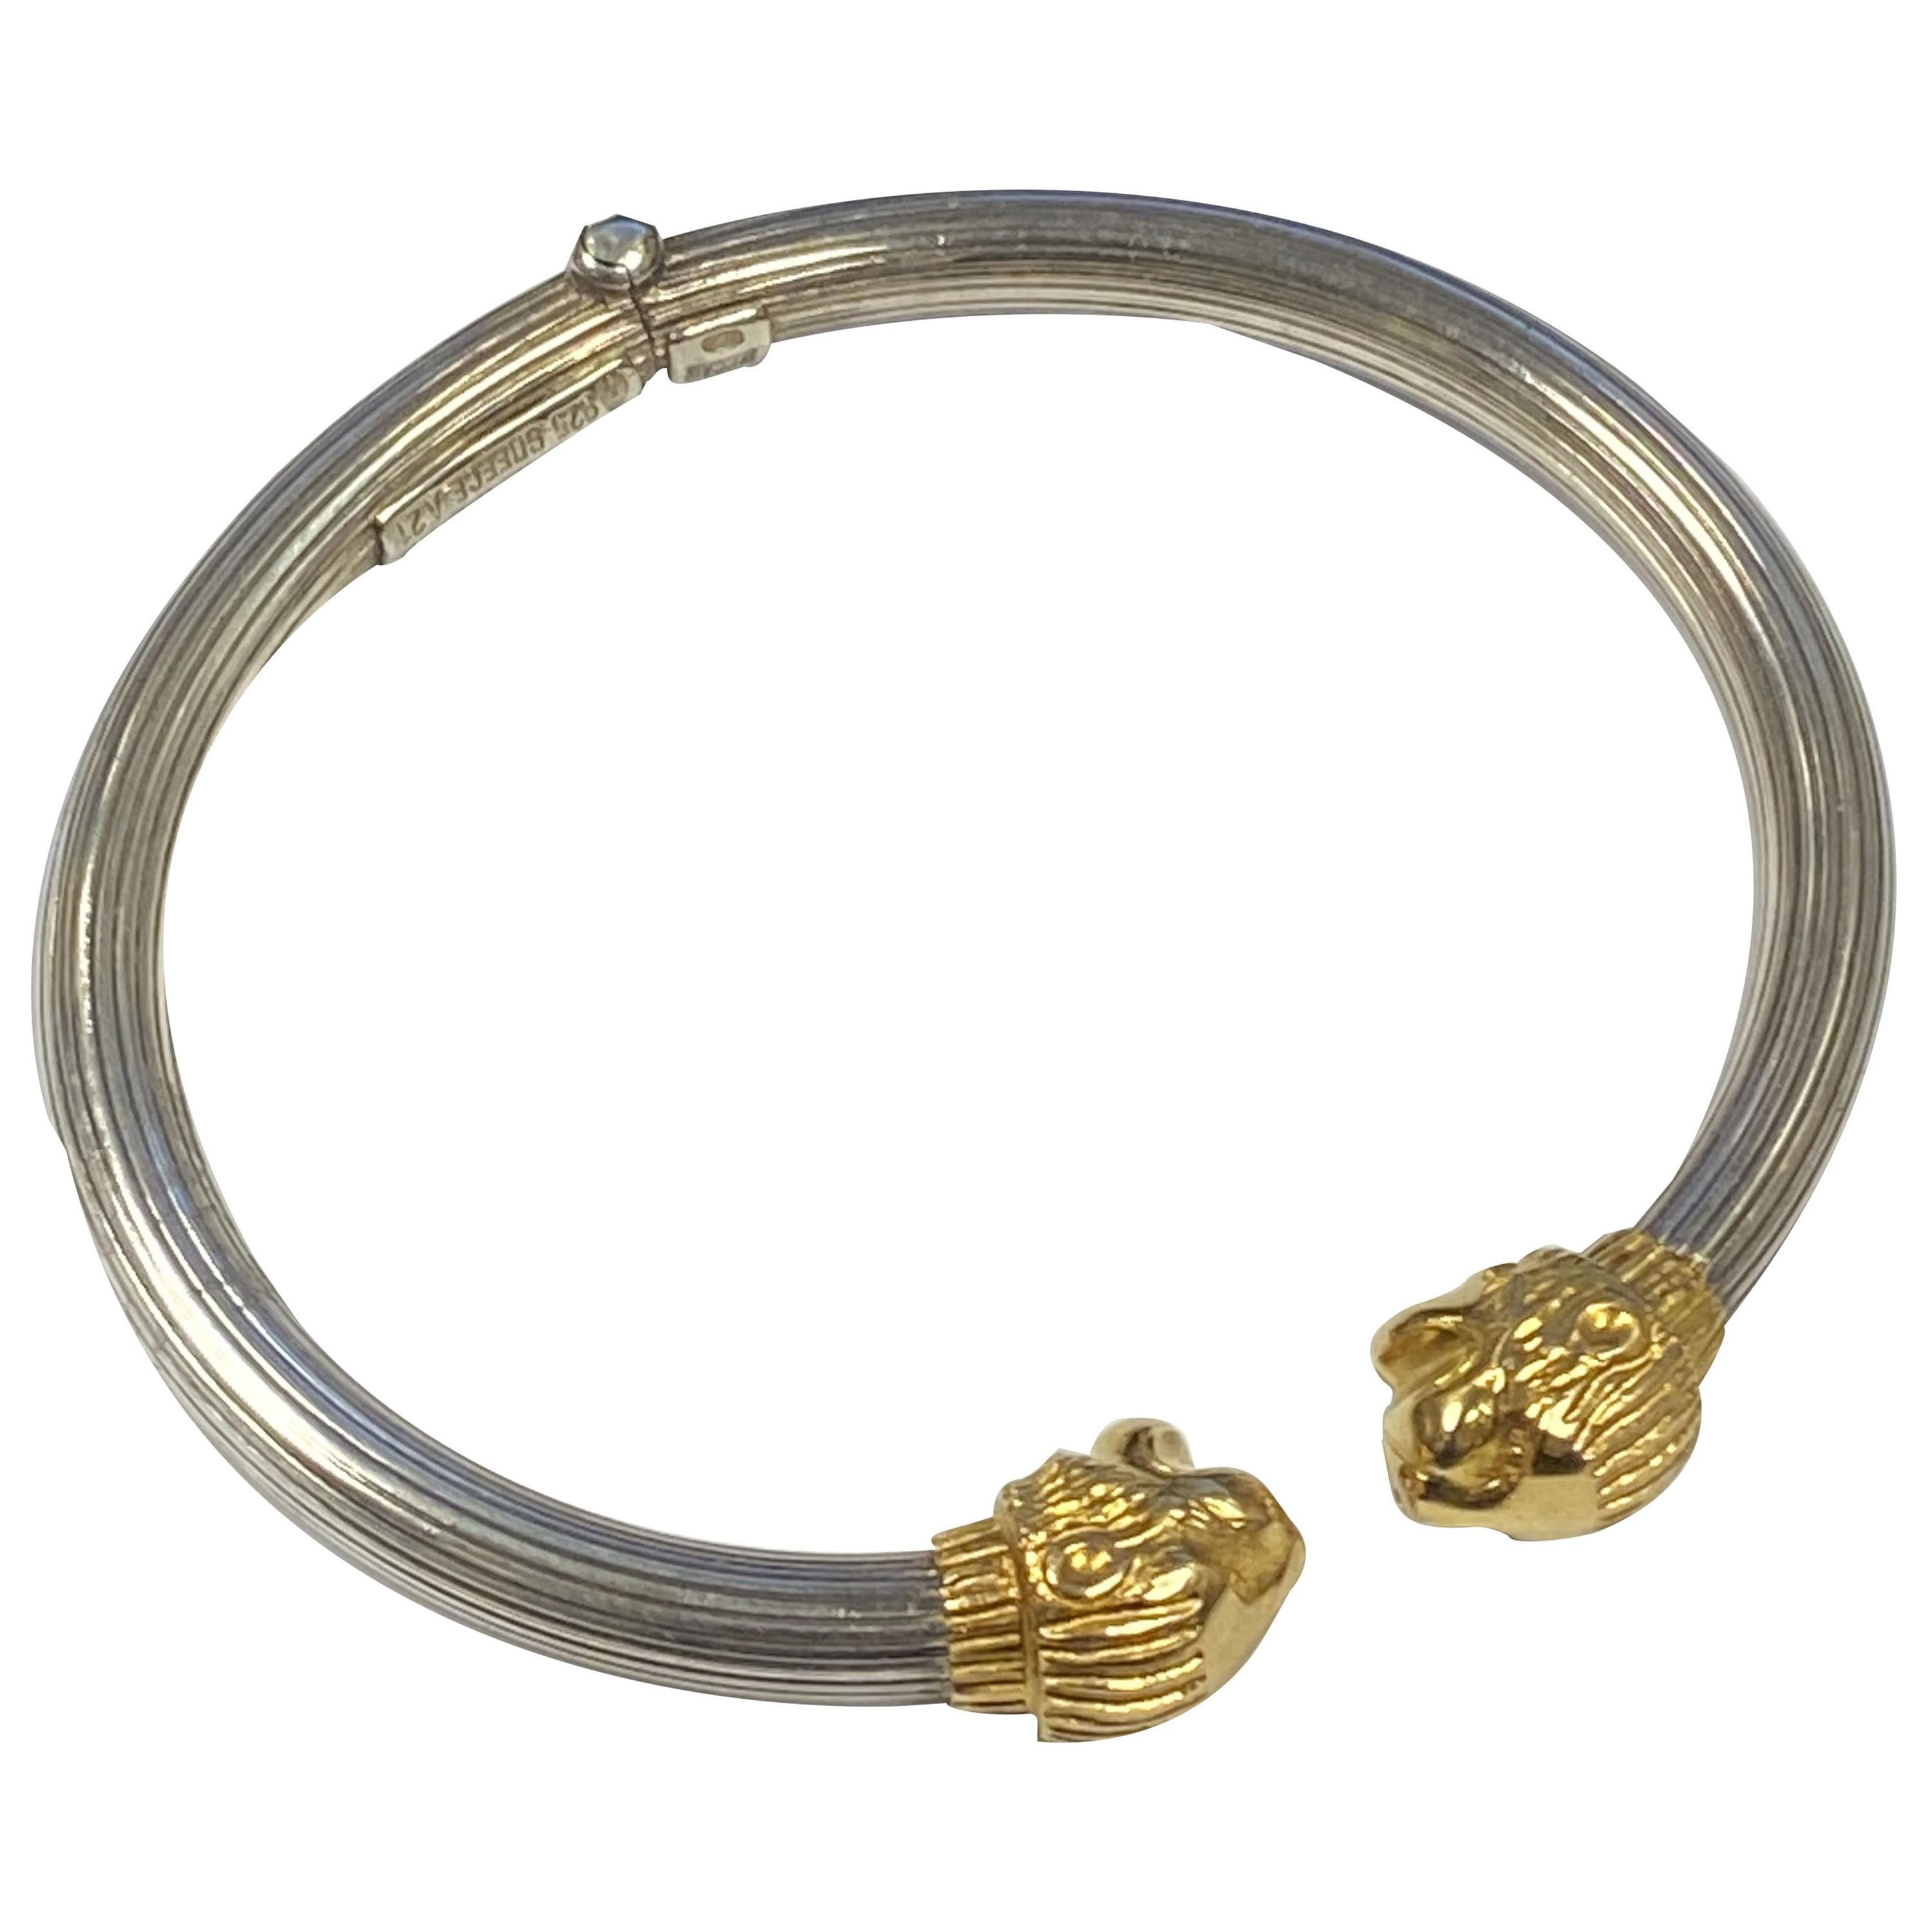 LaLaounis Silver and Gold Chimera Head Bangle Bracelet